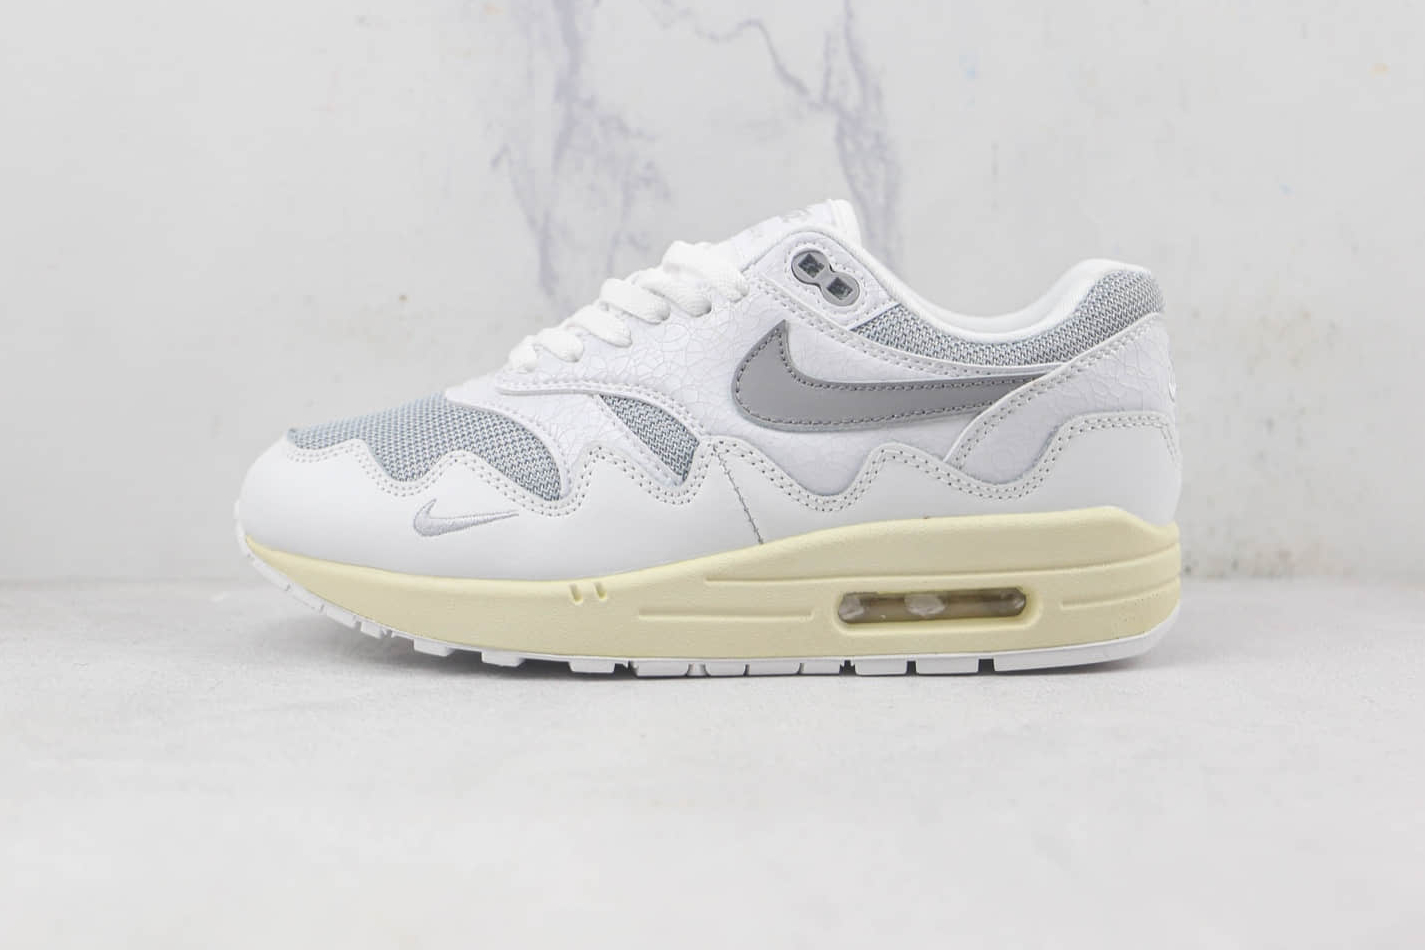 Nike Patta x Air Max 1 'White' DQ0299-100 - Limited Edition Sneakers